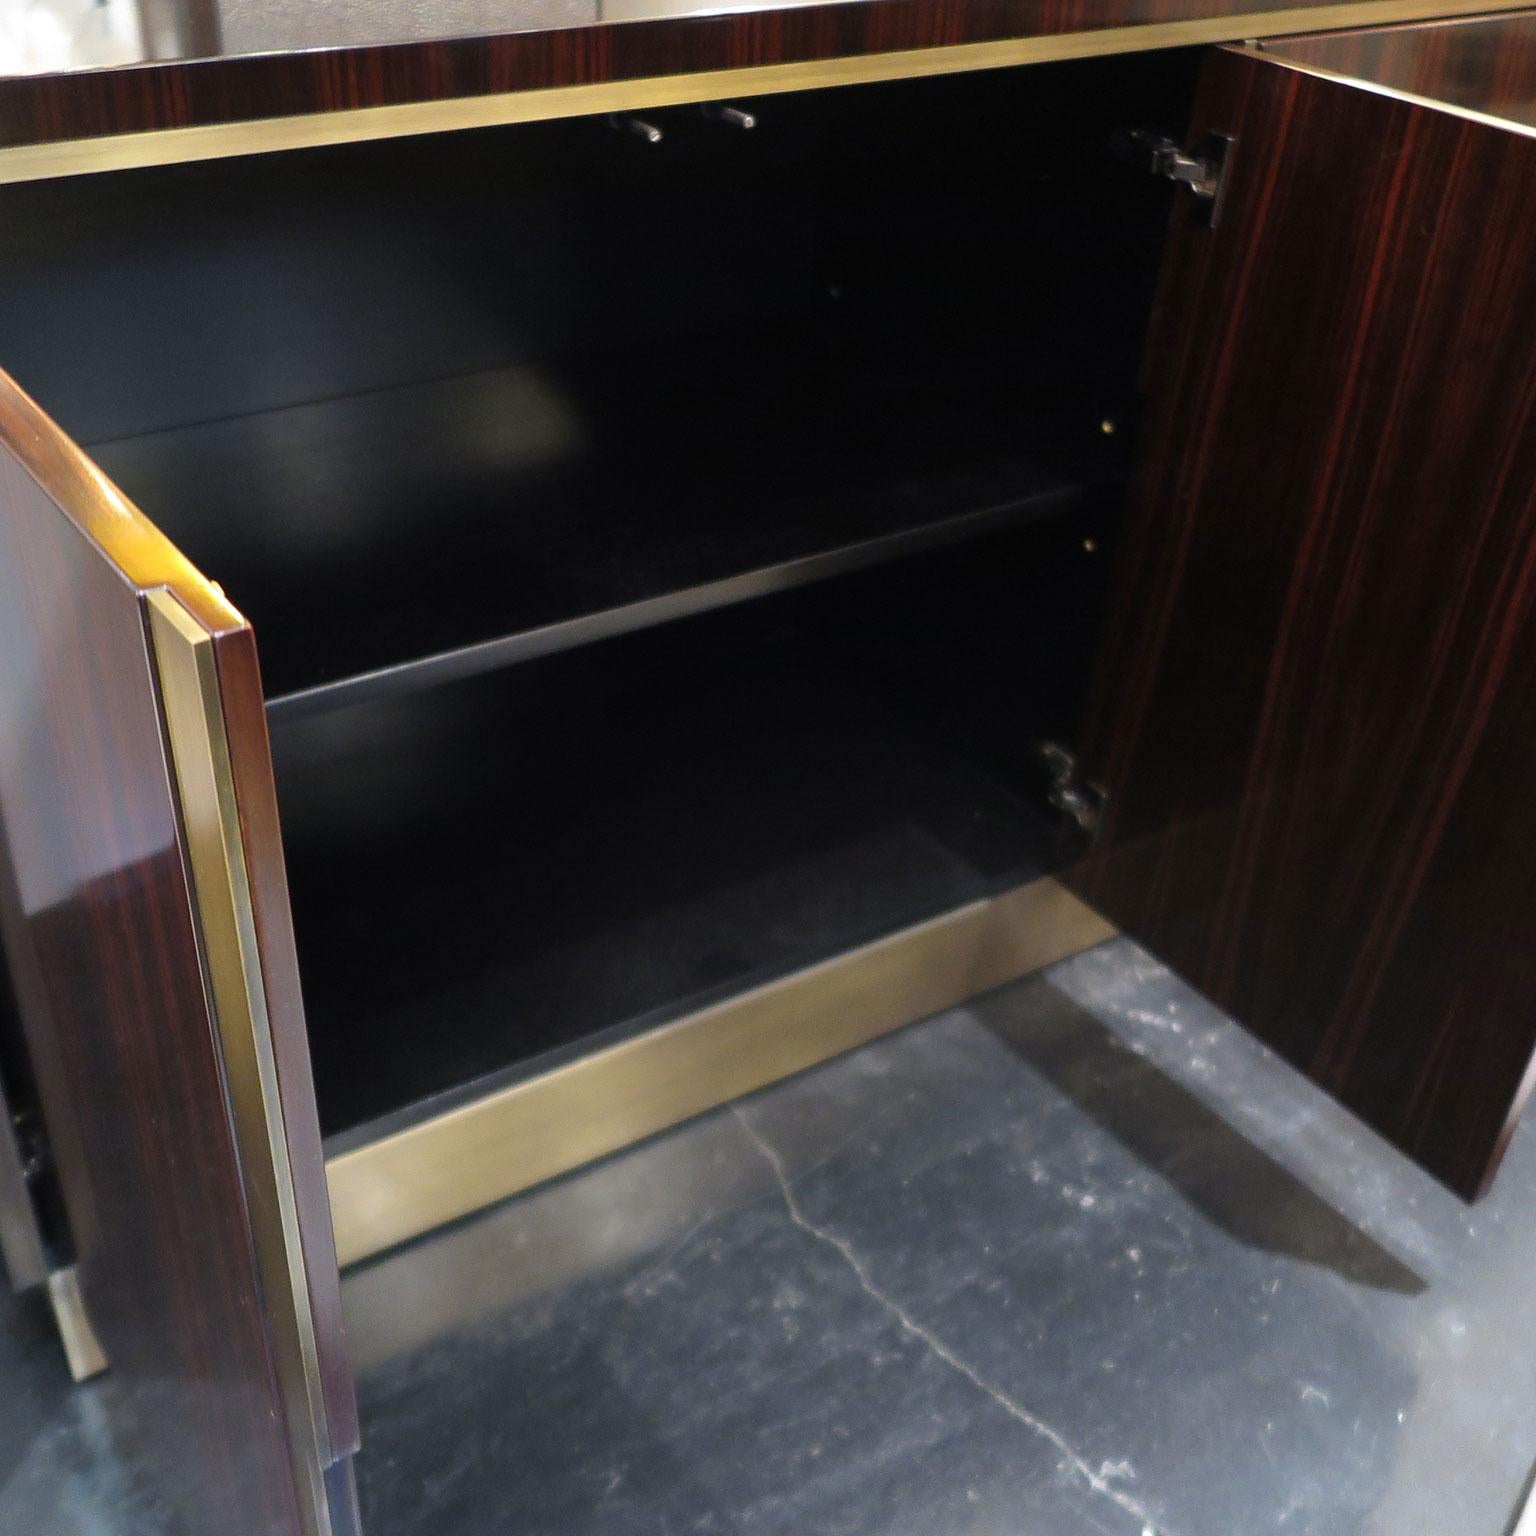 Sideboard in high-gloss dark Macassar ebony with metal base and door details. Five doors have touch-latch hardware and vertical angular brushed brass divisions. The cabinet doors open to a single space with an adjustable shelf that runs the length